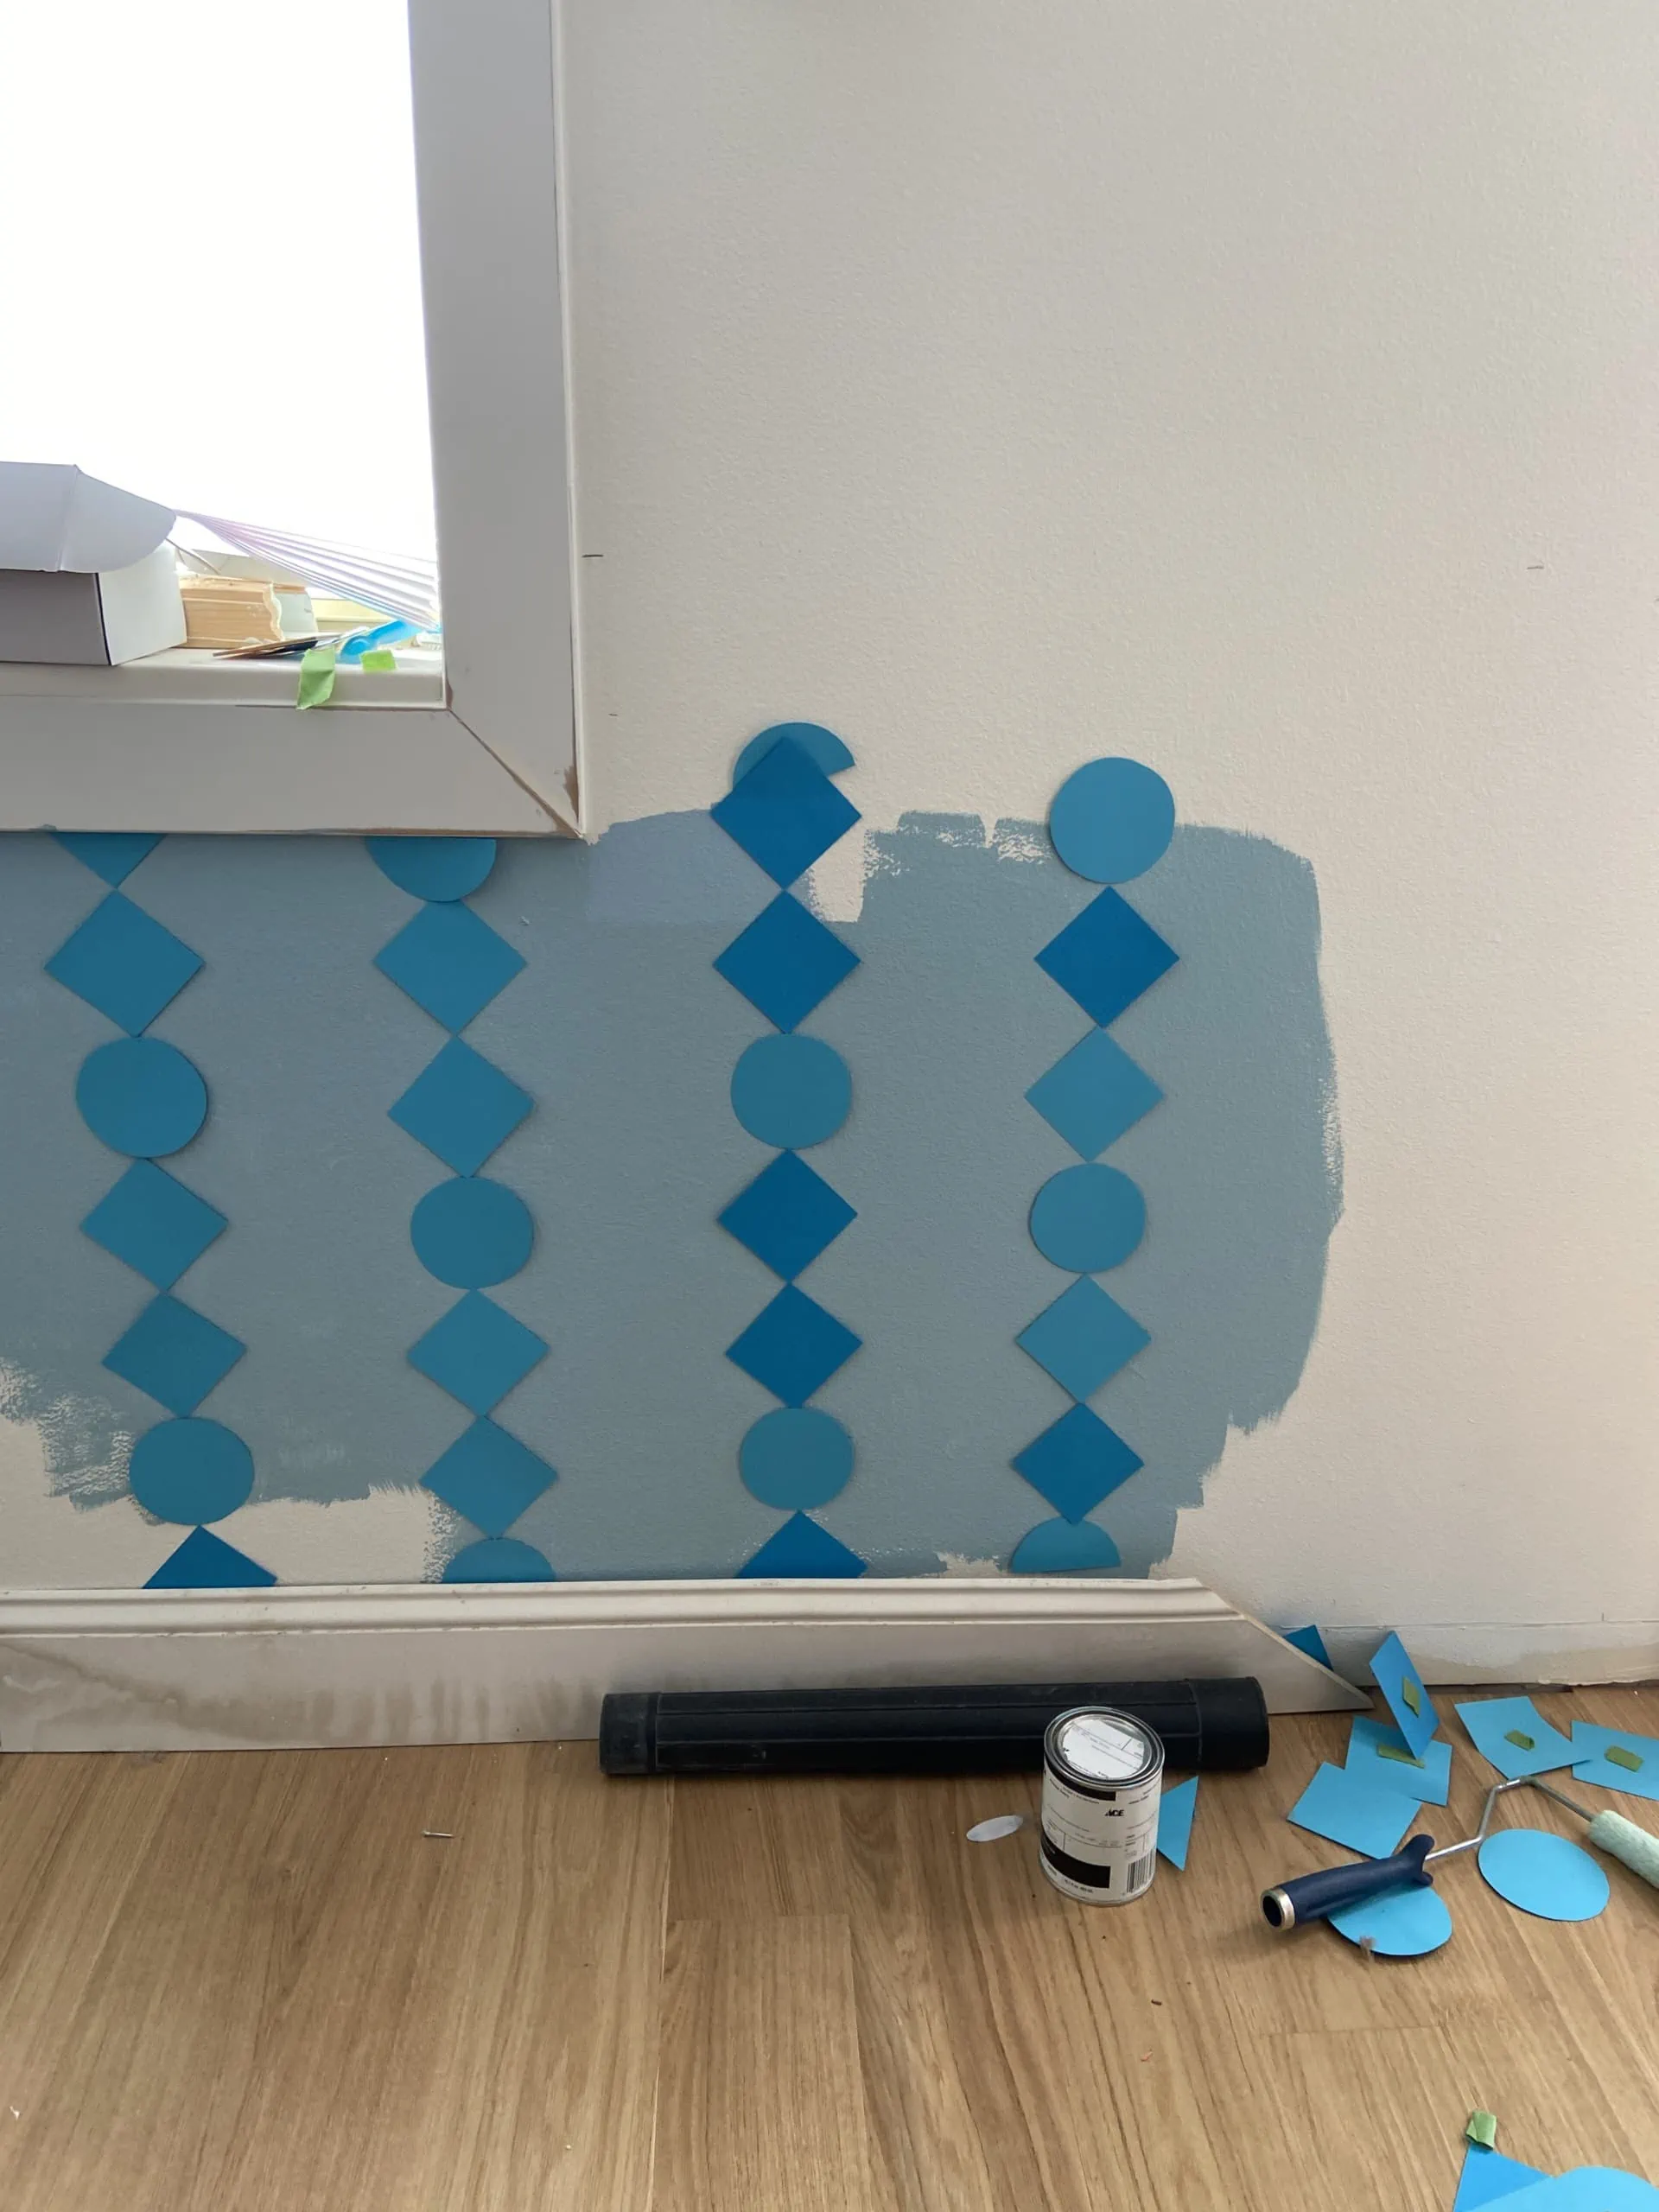 Paper mockup of DIY wainscoting on a white and blue wall.